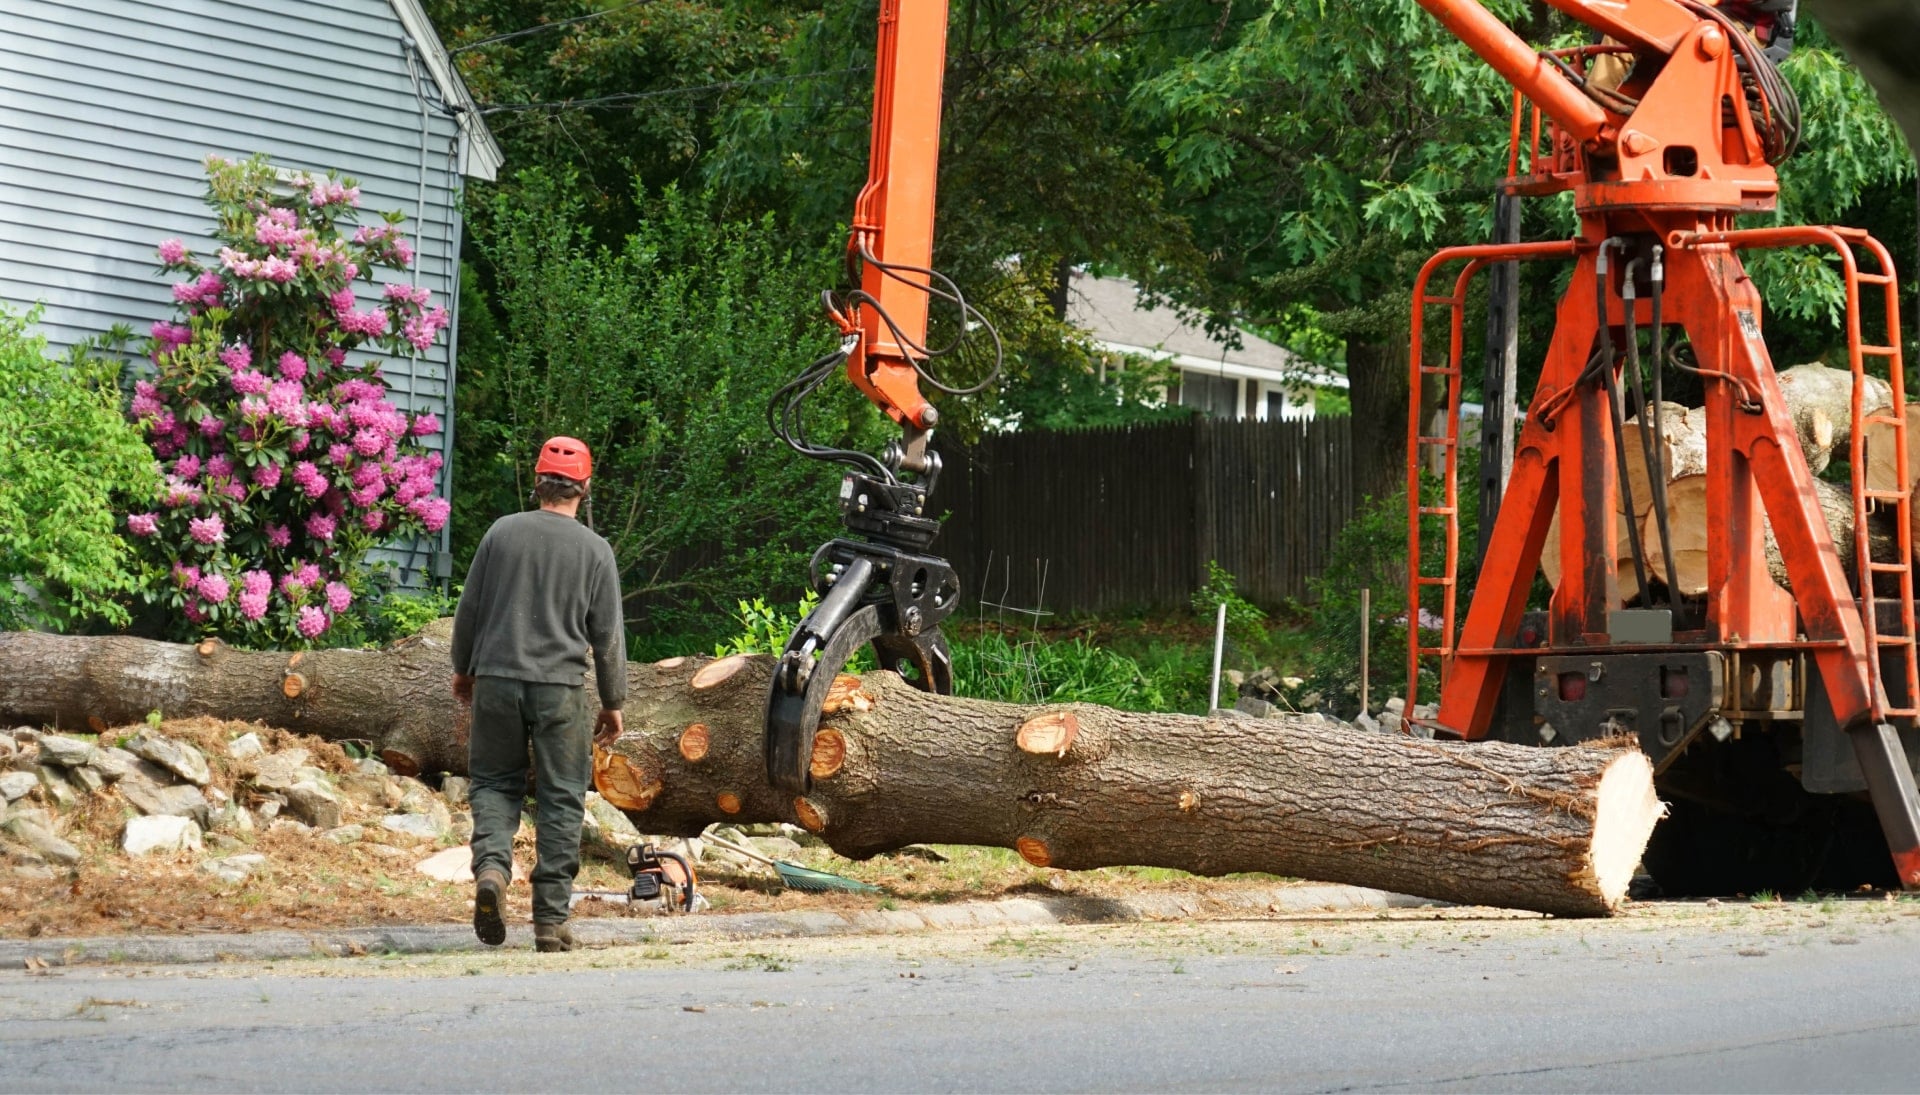 Local partner for Tree removal services in Nashville